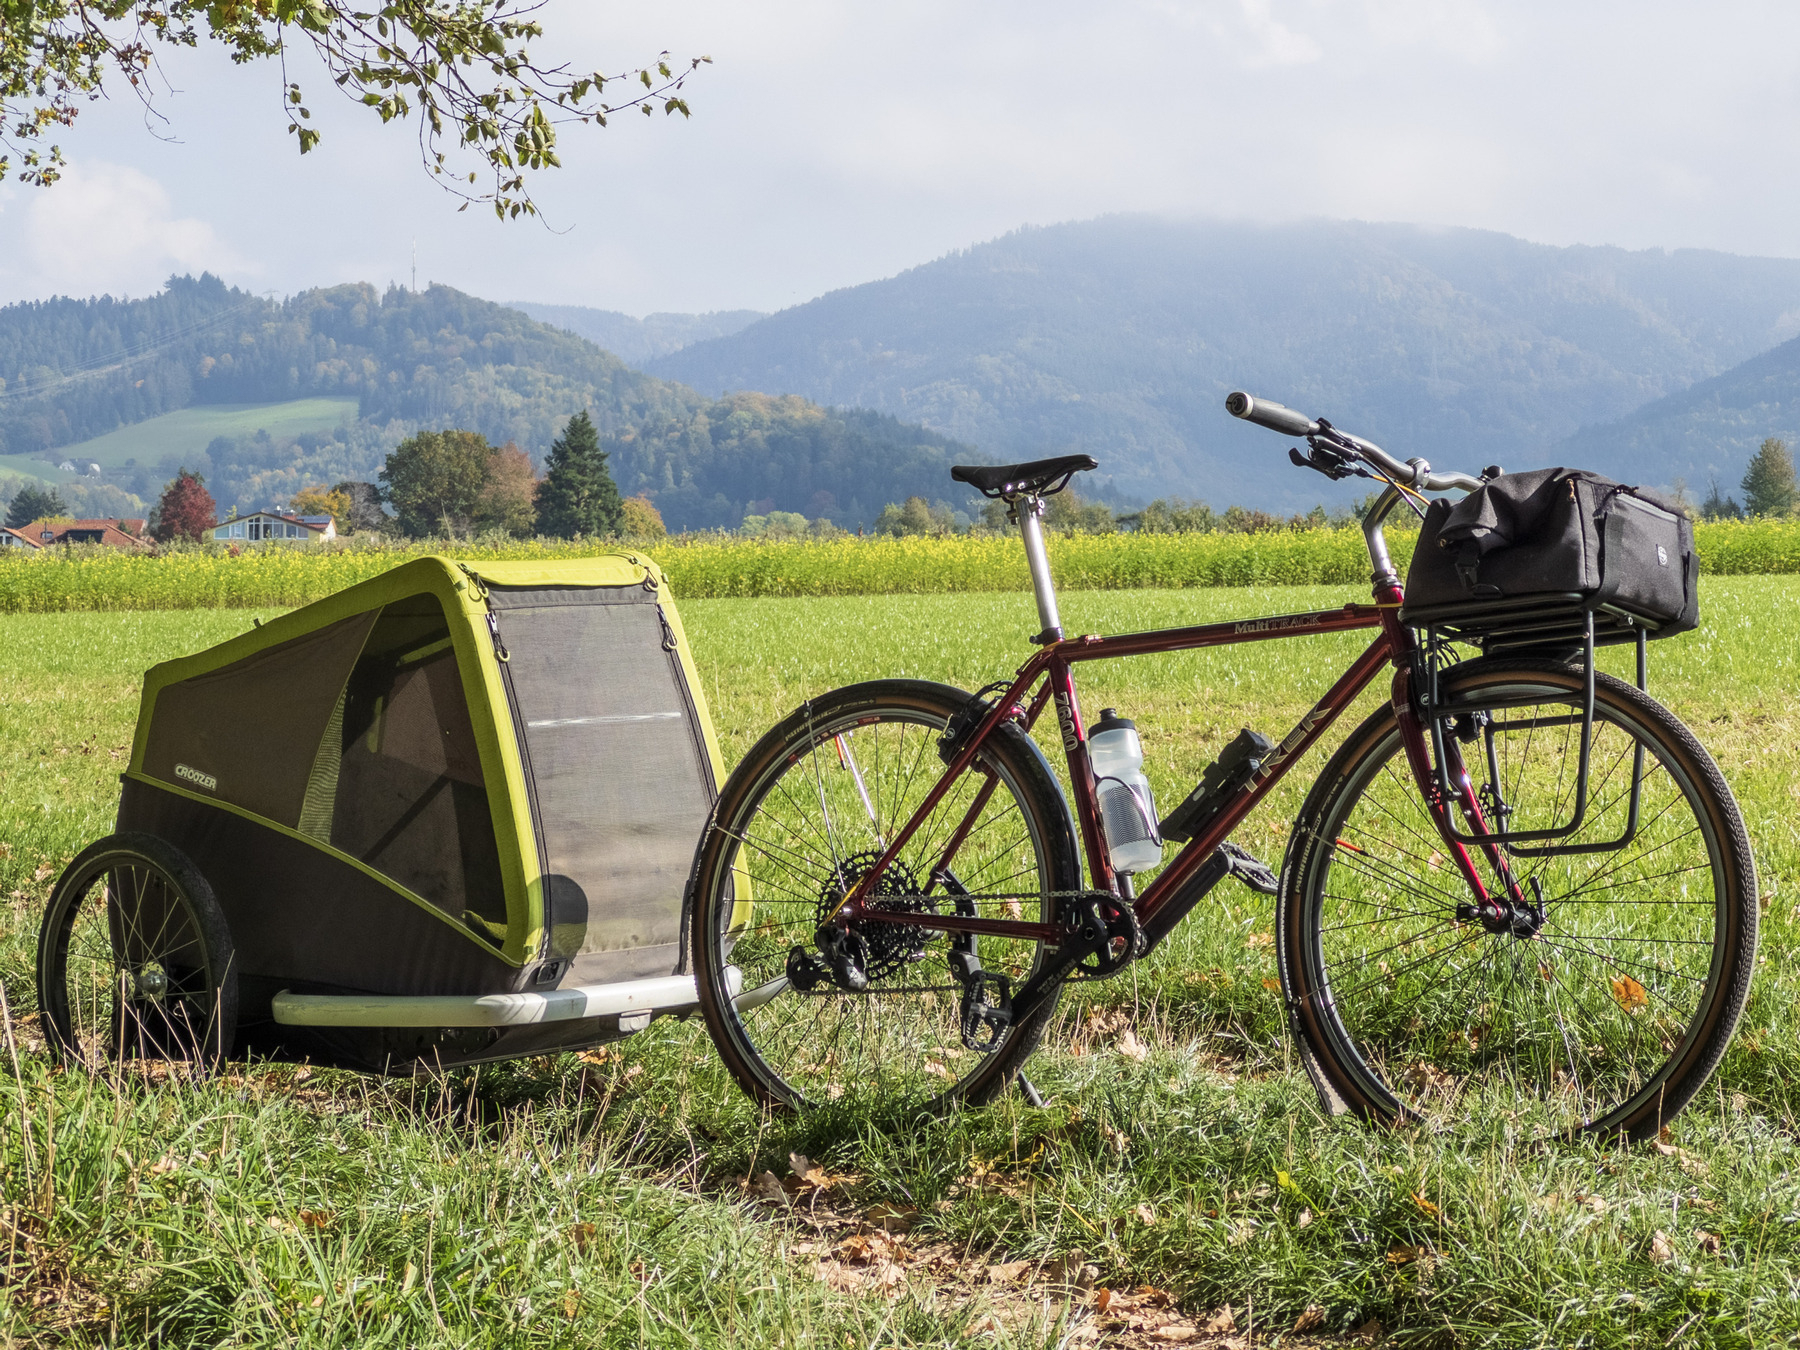 Retro-mod of a 1996 Trek MultiTrack rigid trekking MTB with a Croozer dog trailer attached. The bike and trailer are standing on a grassy path alongside a green field, in front of a slightly hazy mountain vista.